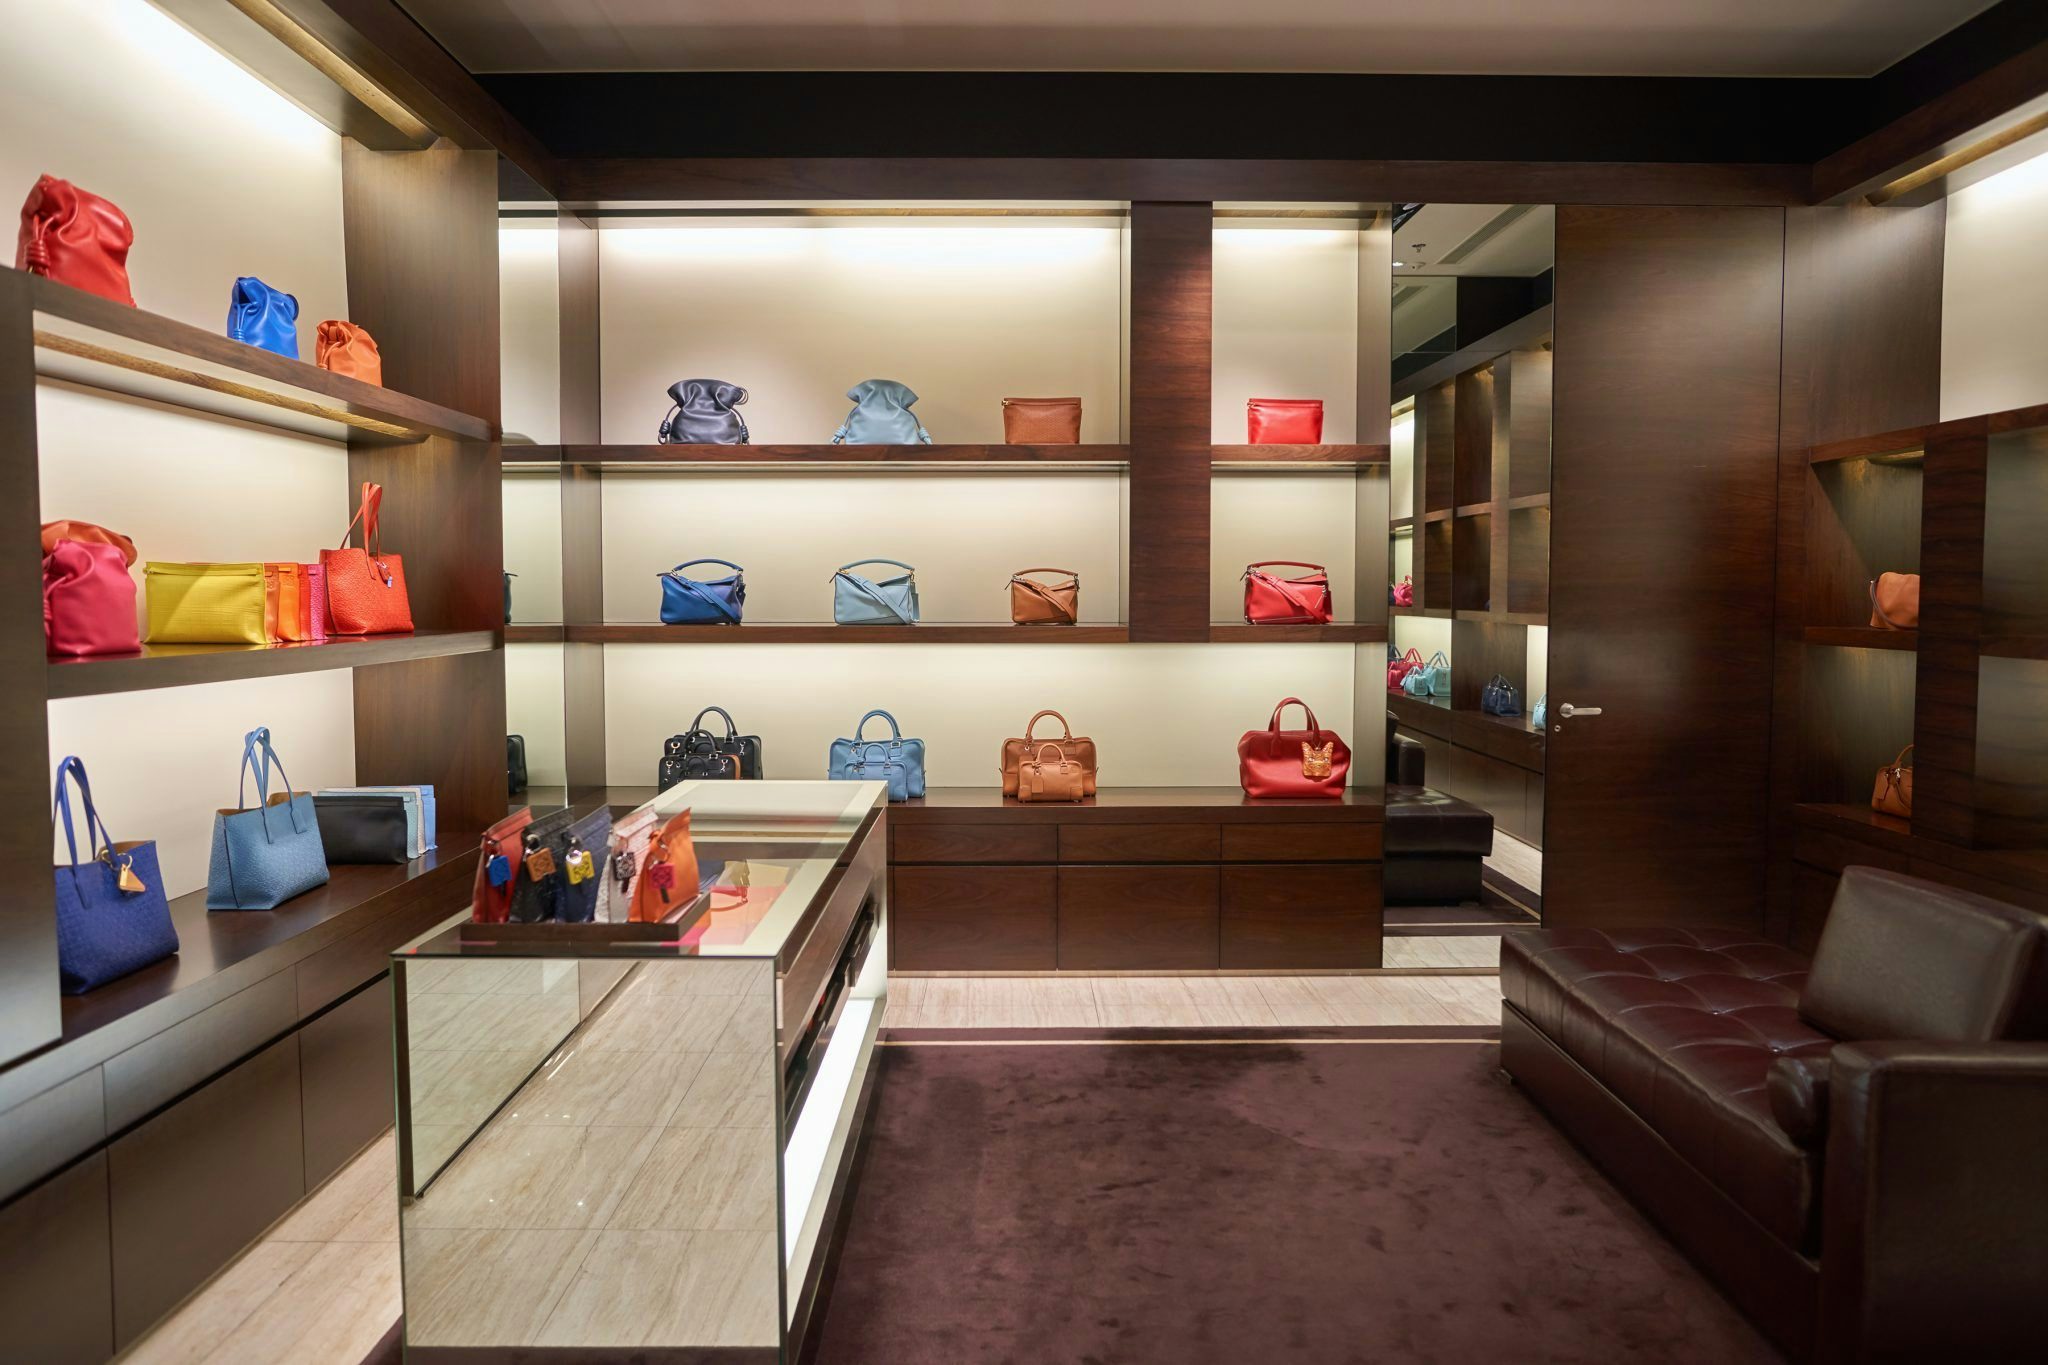 Tmall's New Luxury Pavilion Taps Spanish Luxury Brand Loewe for Special Sale